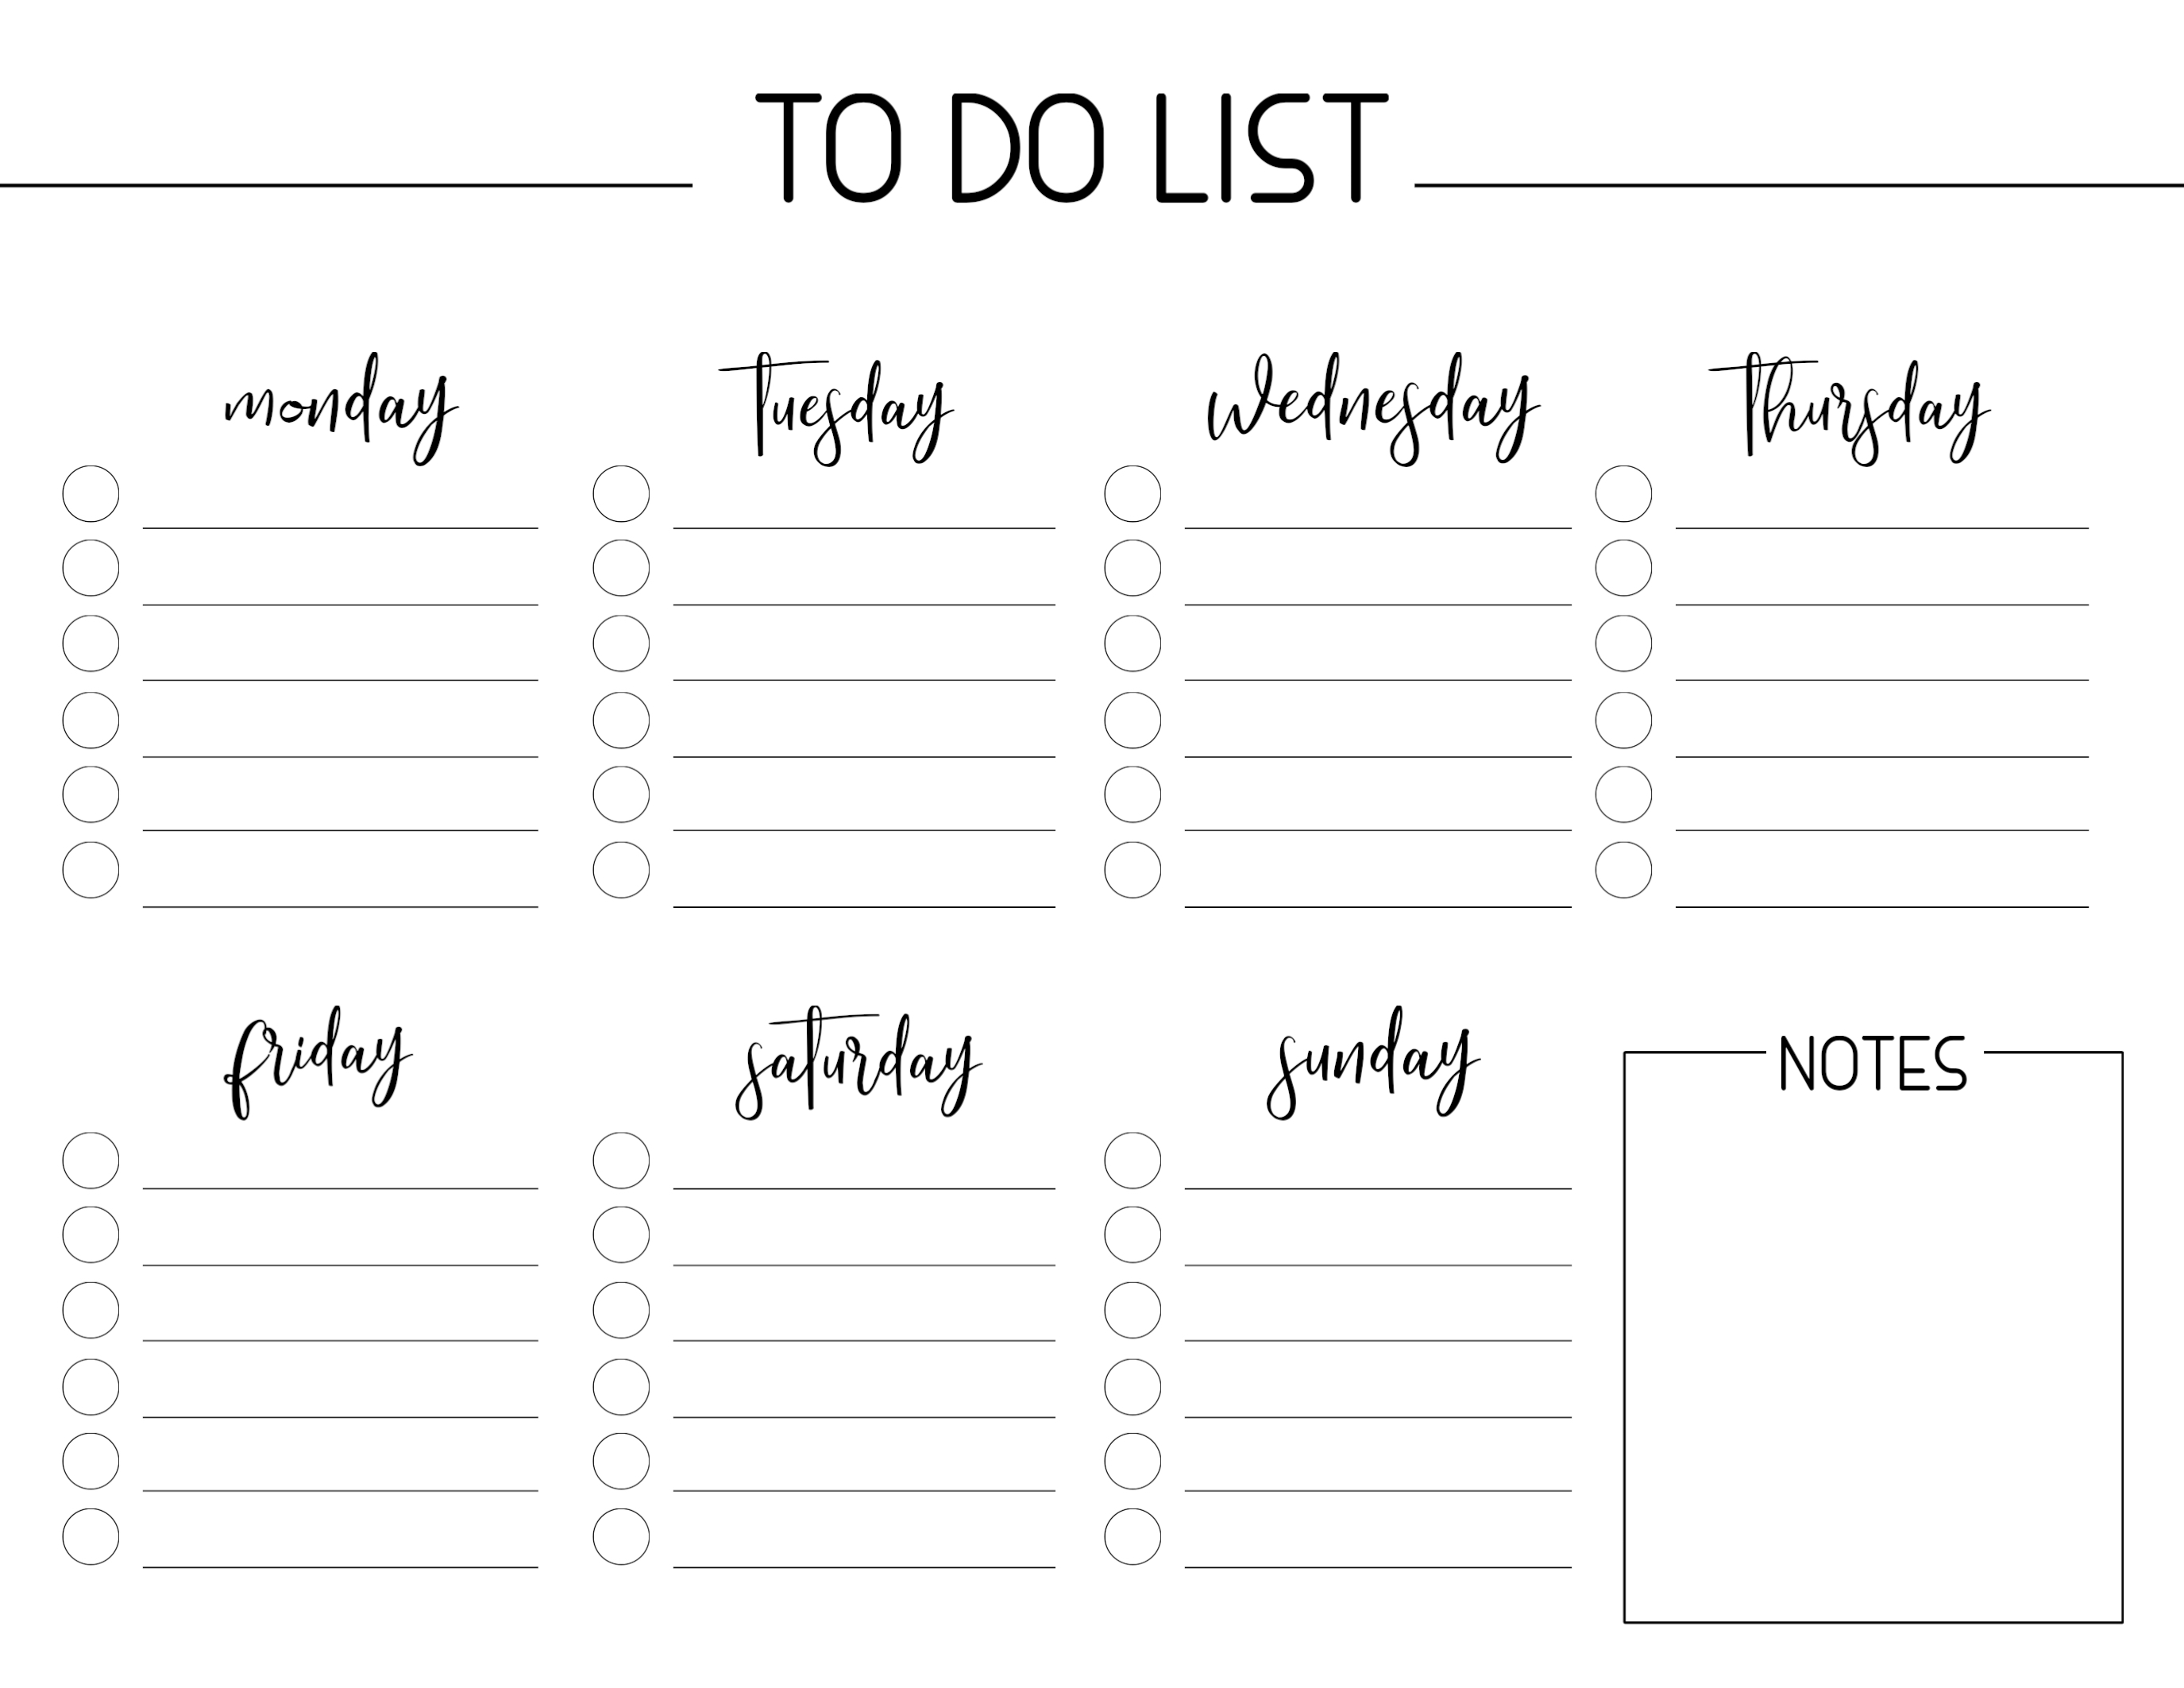 Weekly Free Printable To Do List - Paper Trail Design